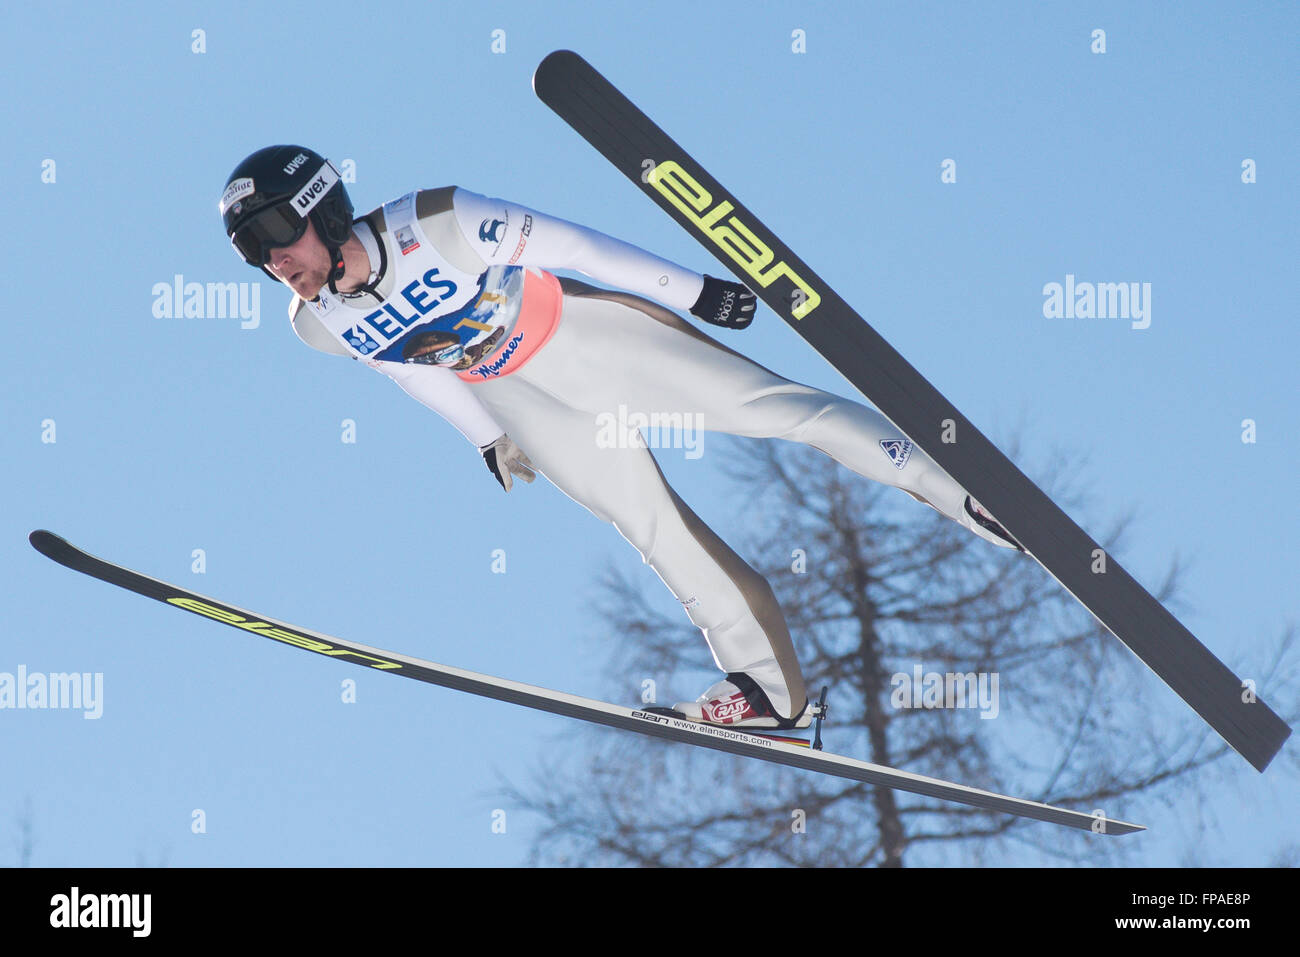 Planica, Slovenia. 18th Mar, 2016. Michael Glasder of United States of America competes during Planica FIS Ski Jumping World Cup finals on the March 18, 2016 in Planica, Slovenia. © Rok Rakun/Pacific Press/Alamy Live News Stock Photo